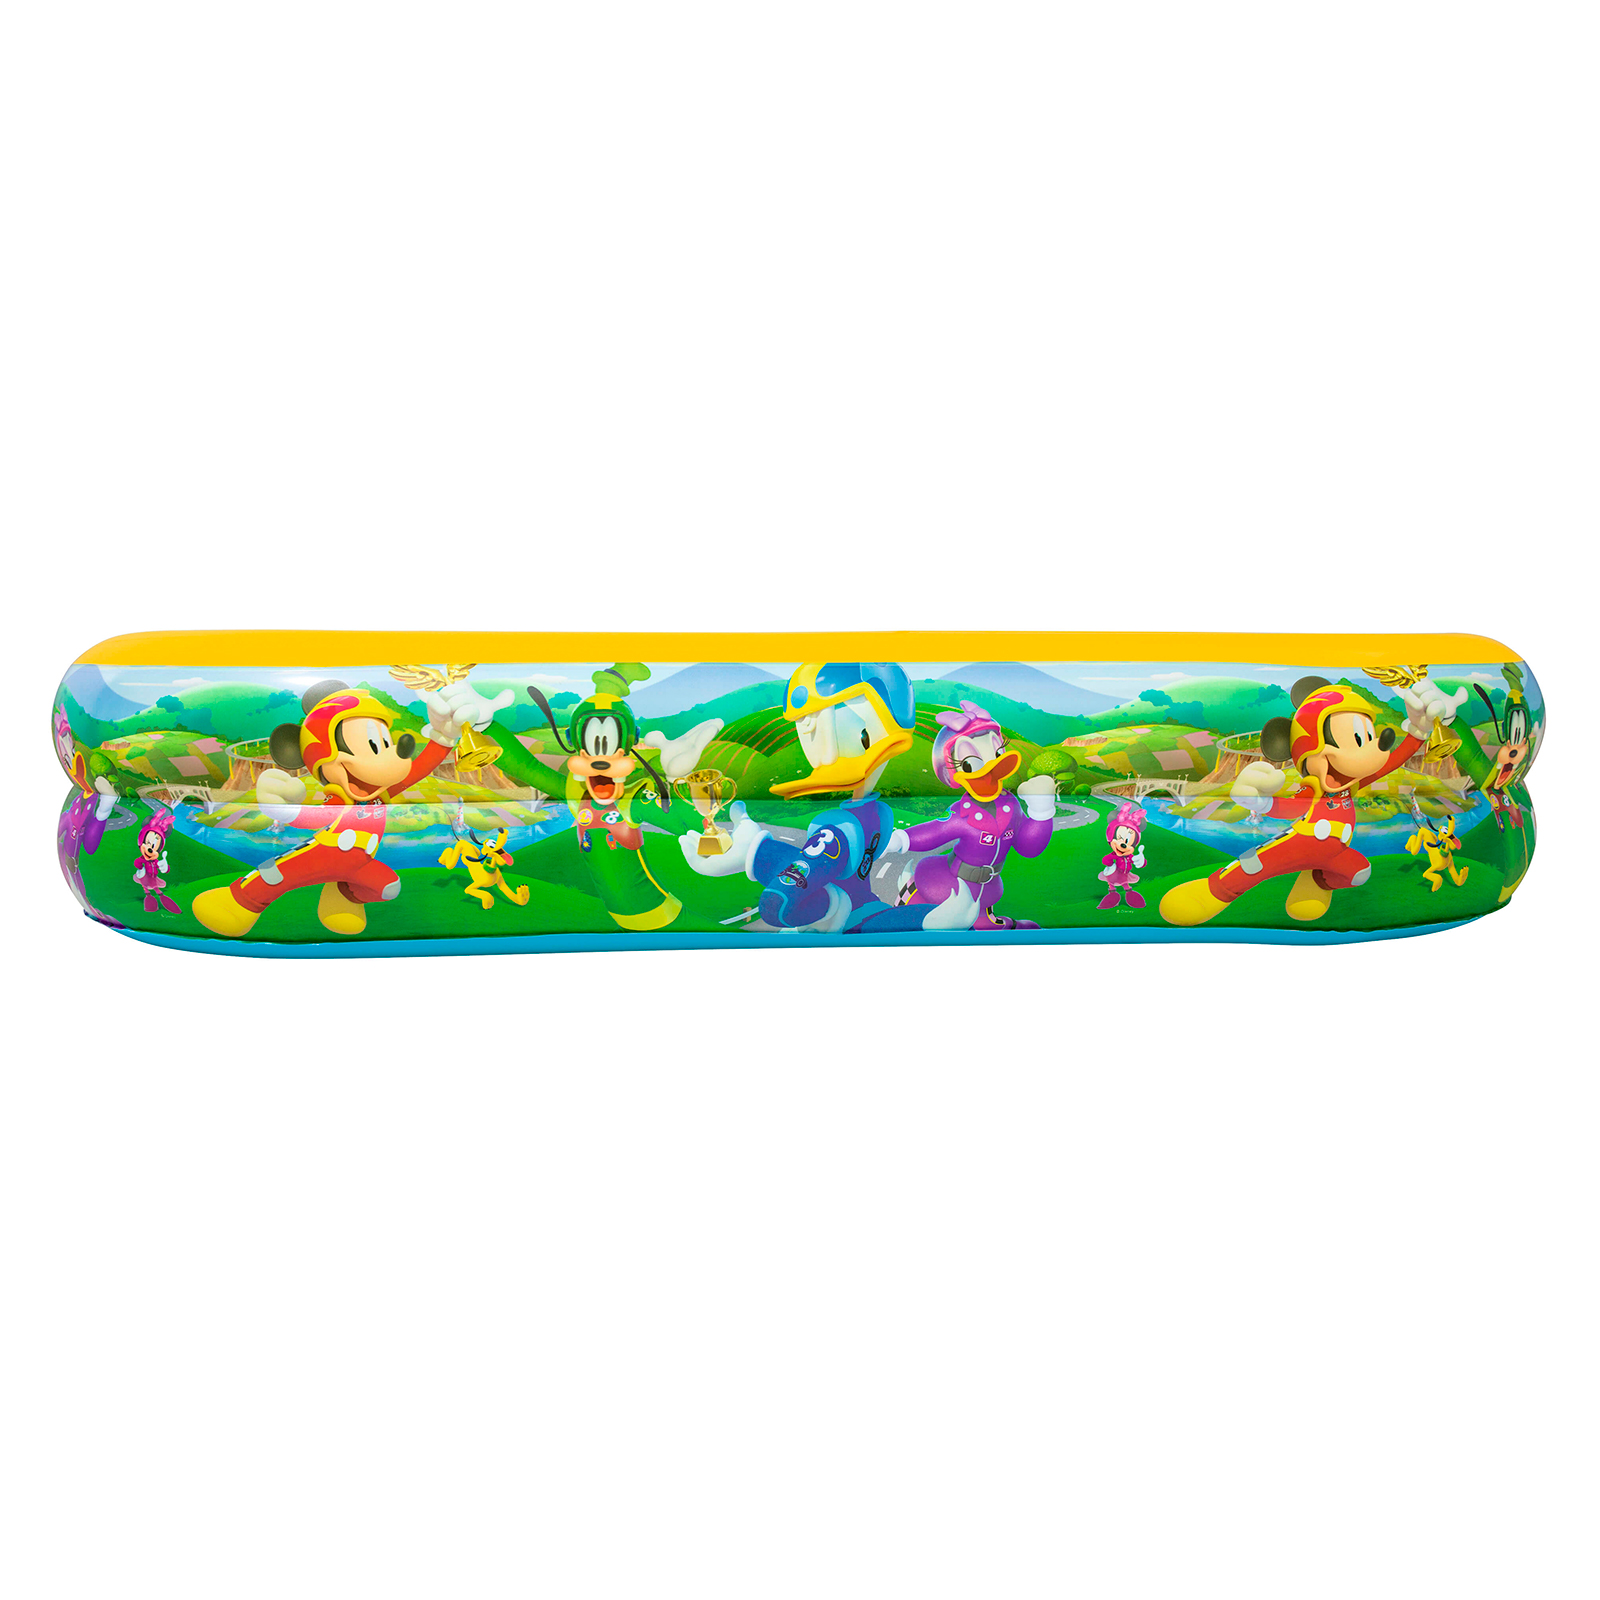 Piscina Hinchable Autoportante Infantil Bestway 262x175x51 Cm Diseño Mickey And The Roadster Racers